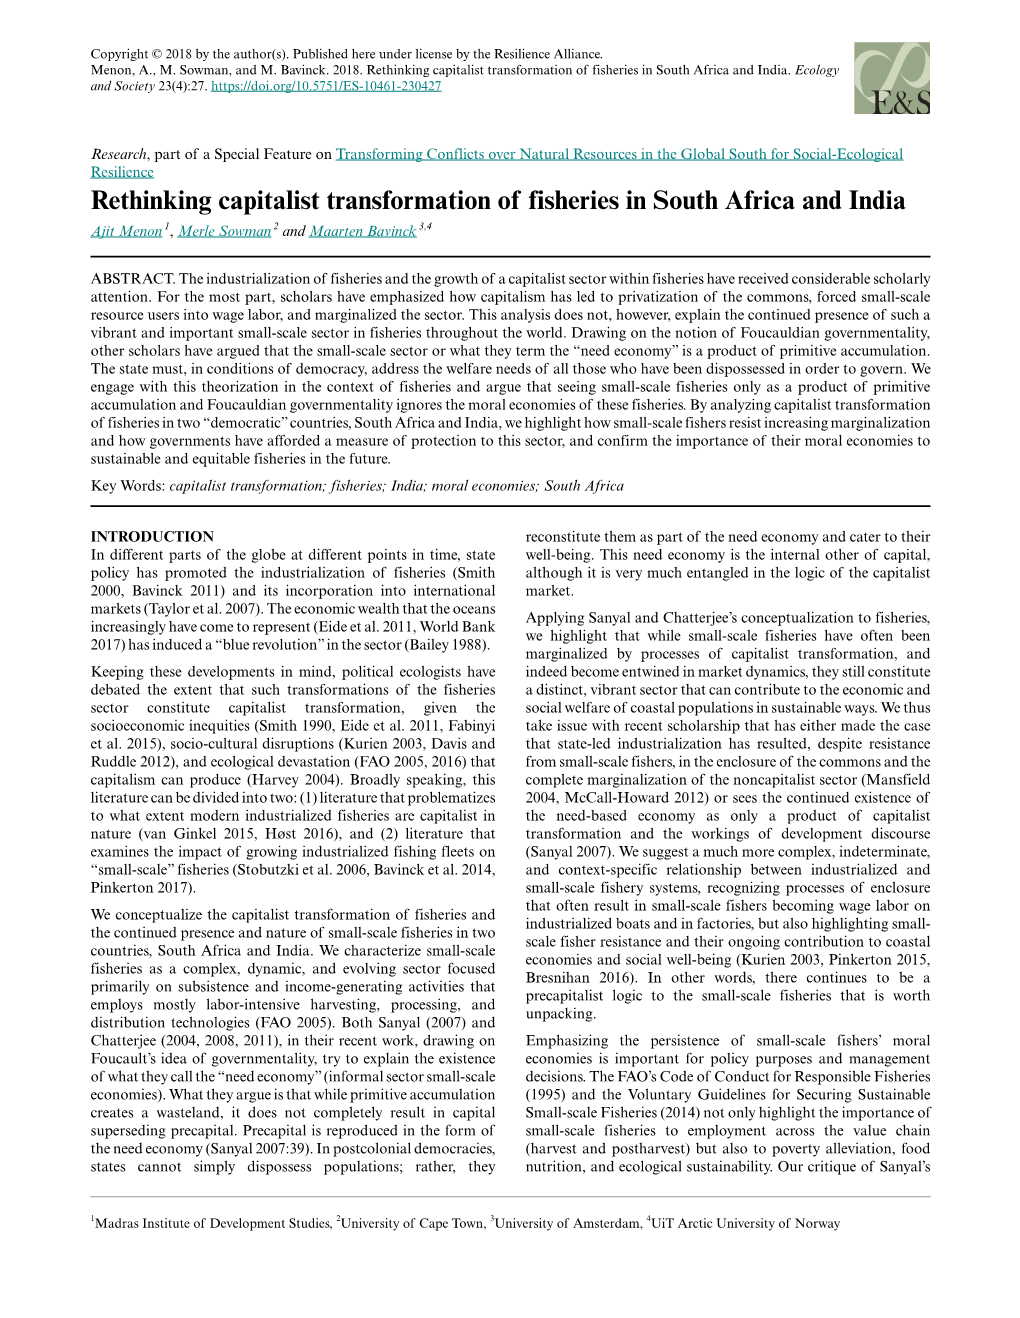 Rethinking Capitalist Transformation of Fisheries in South Africa and India